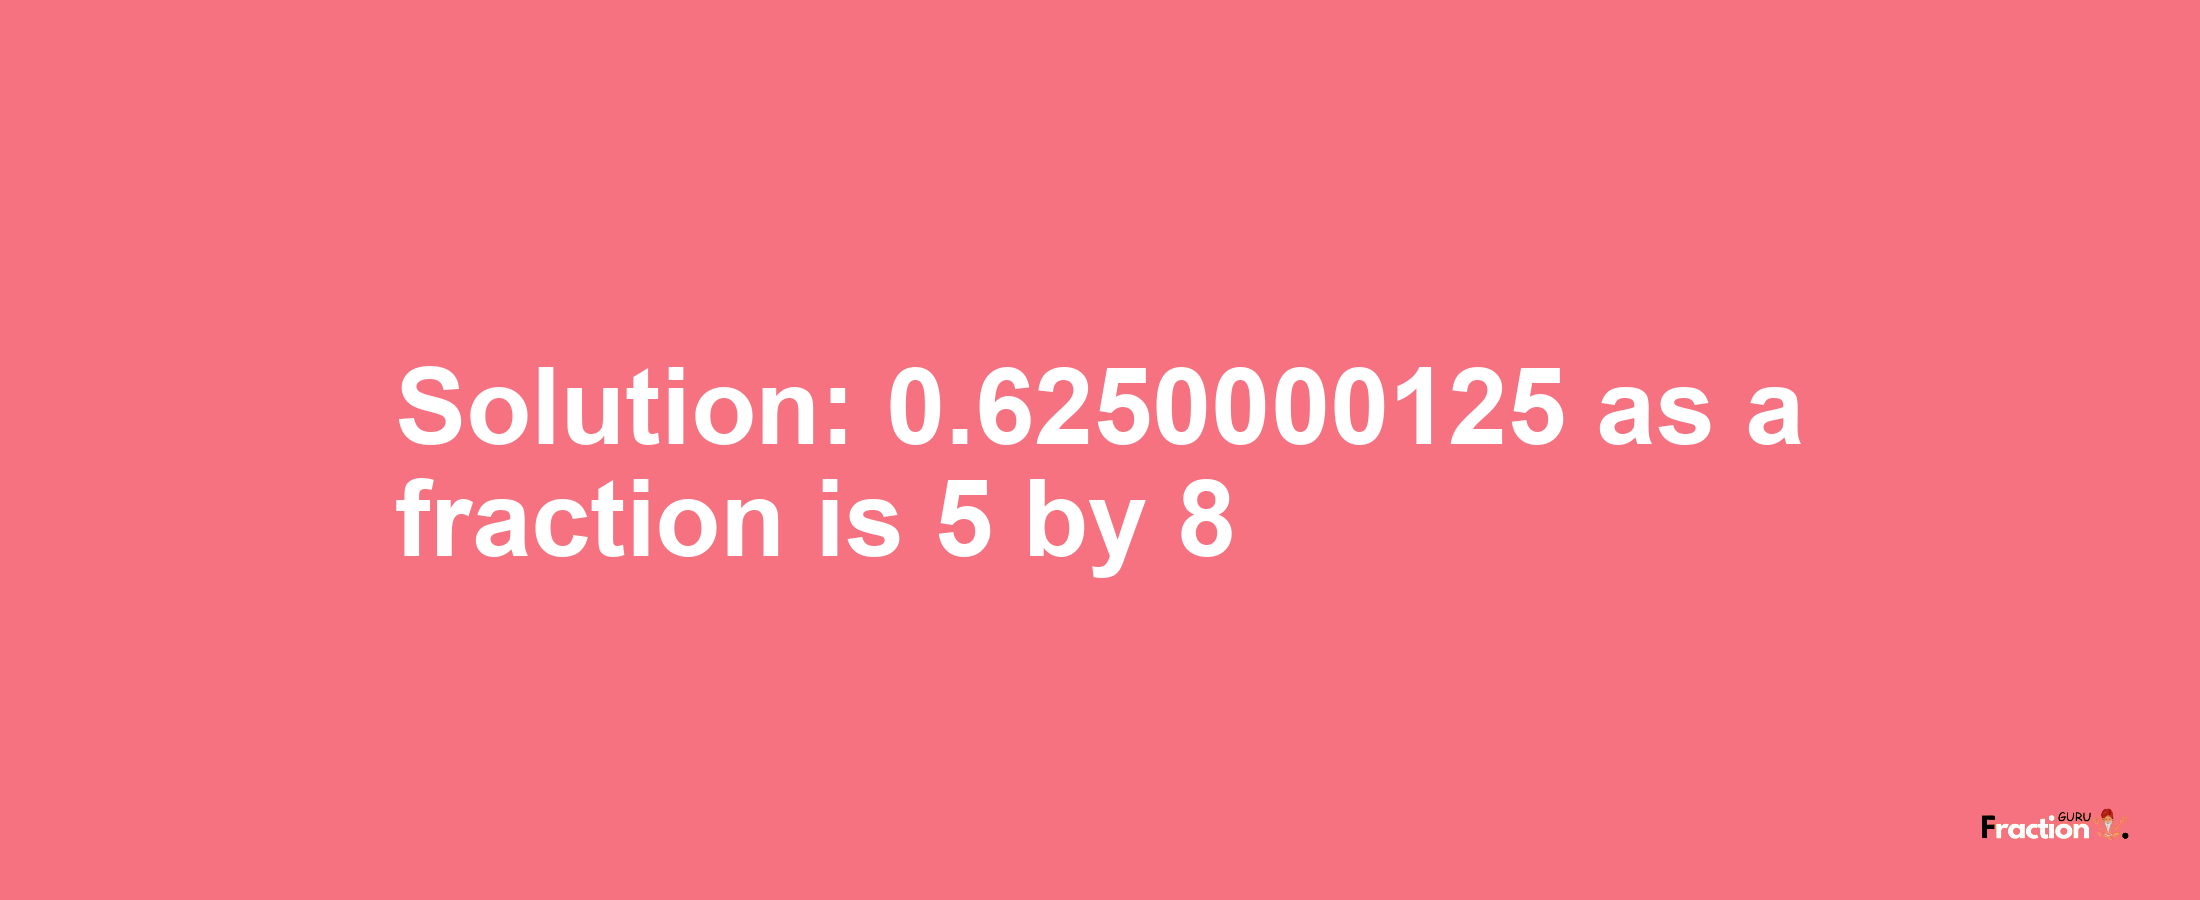 Solution:0.6250000125 as a fraction is 5/8